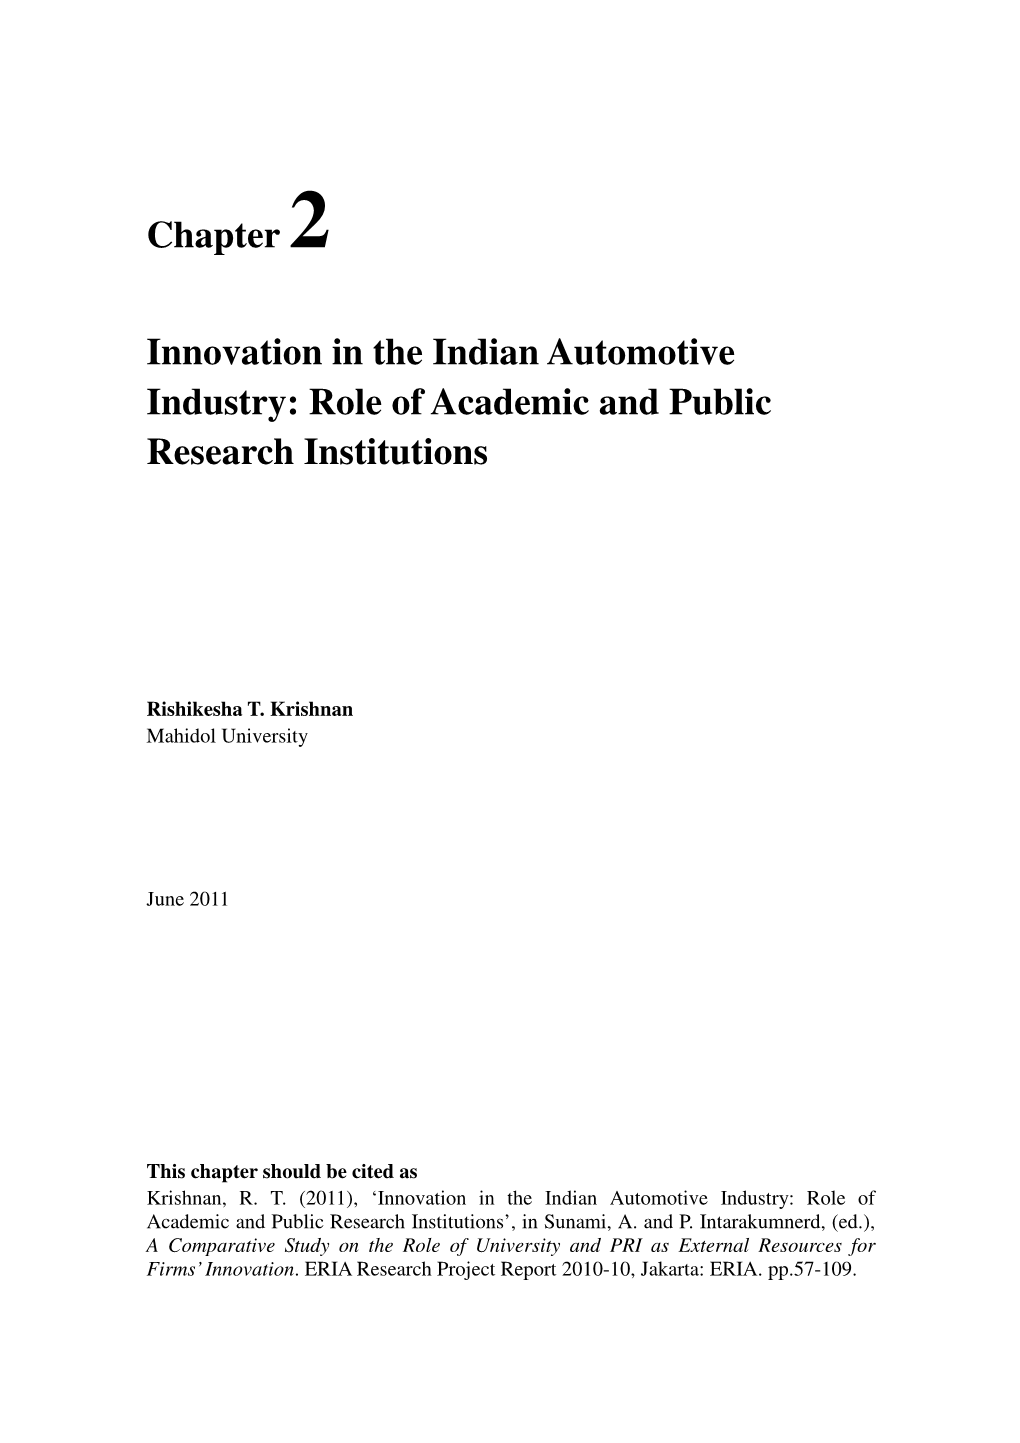 Chapter 2 Innovation in the Indian Automotive Industry: Role Of